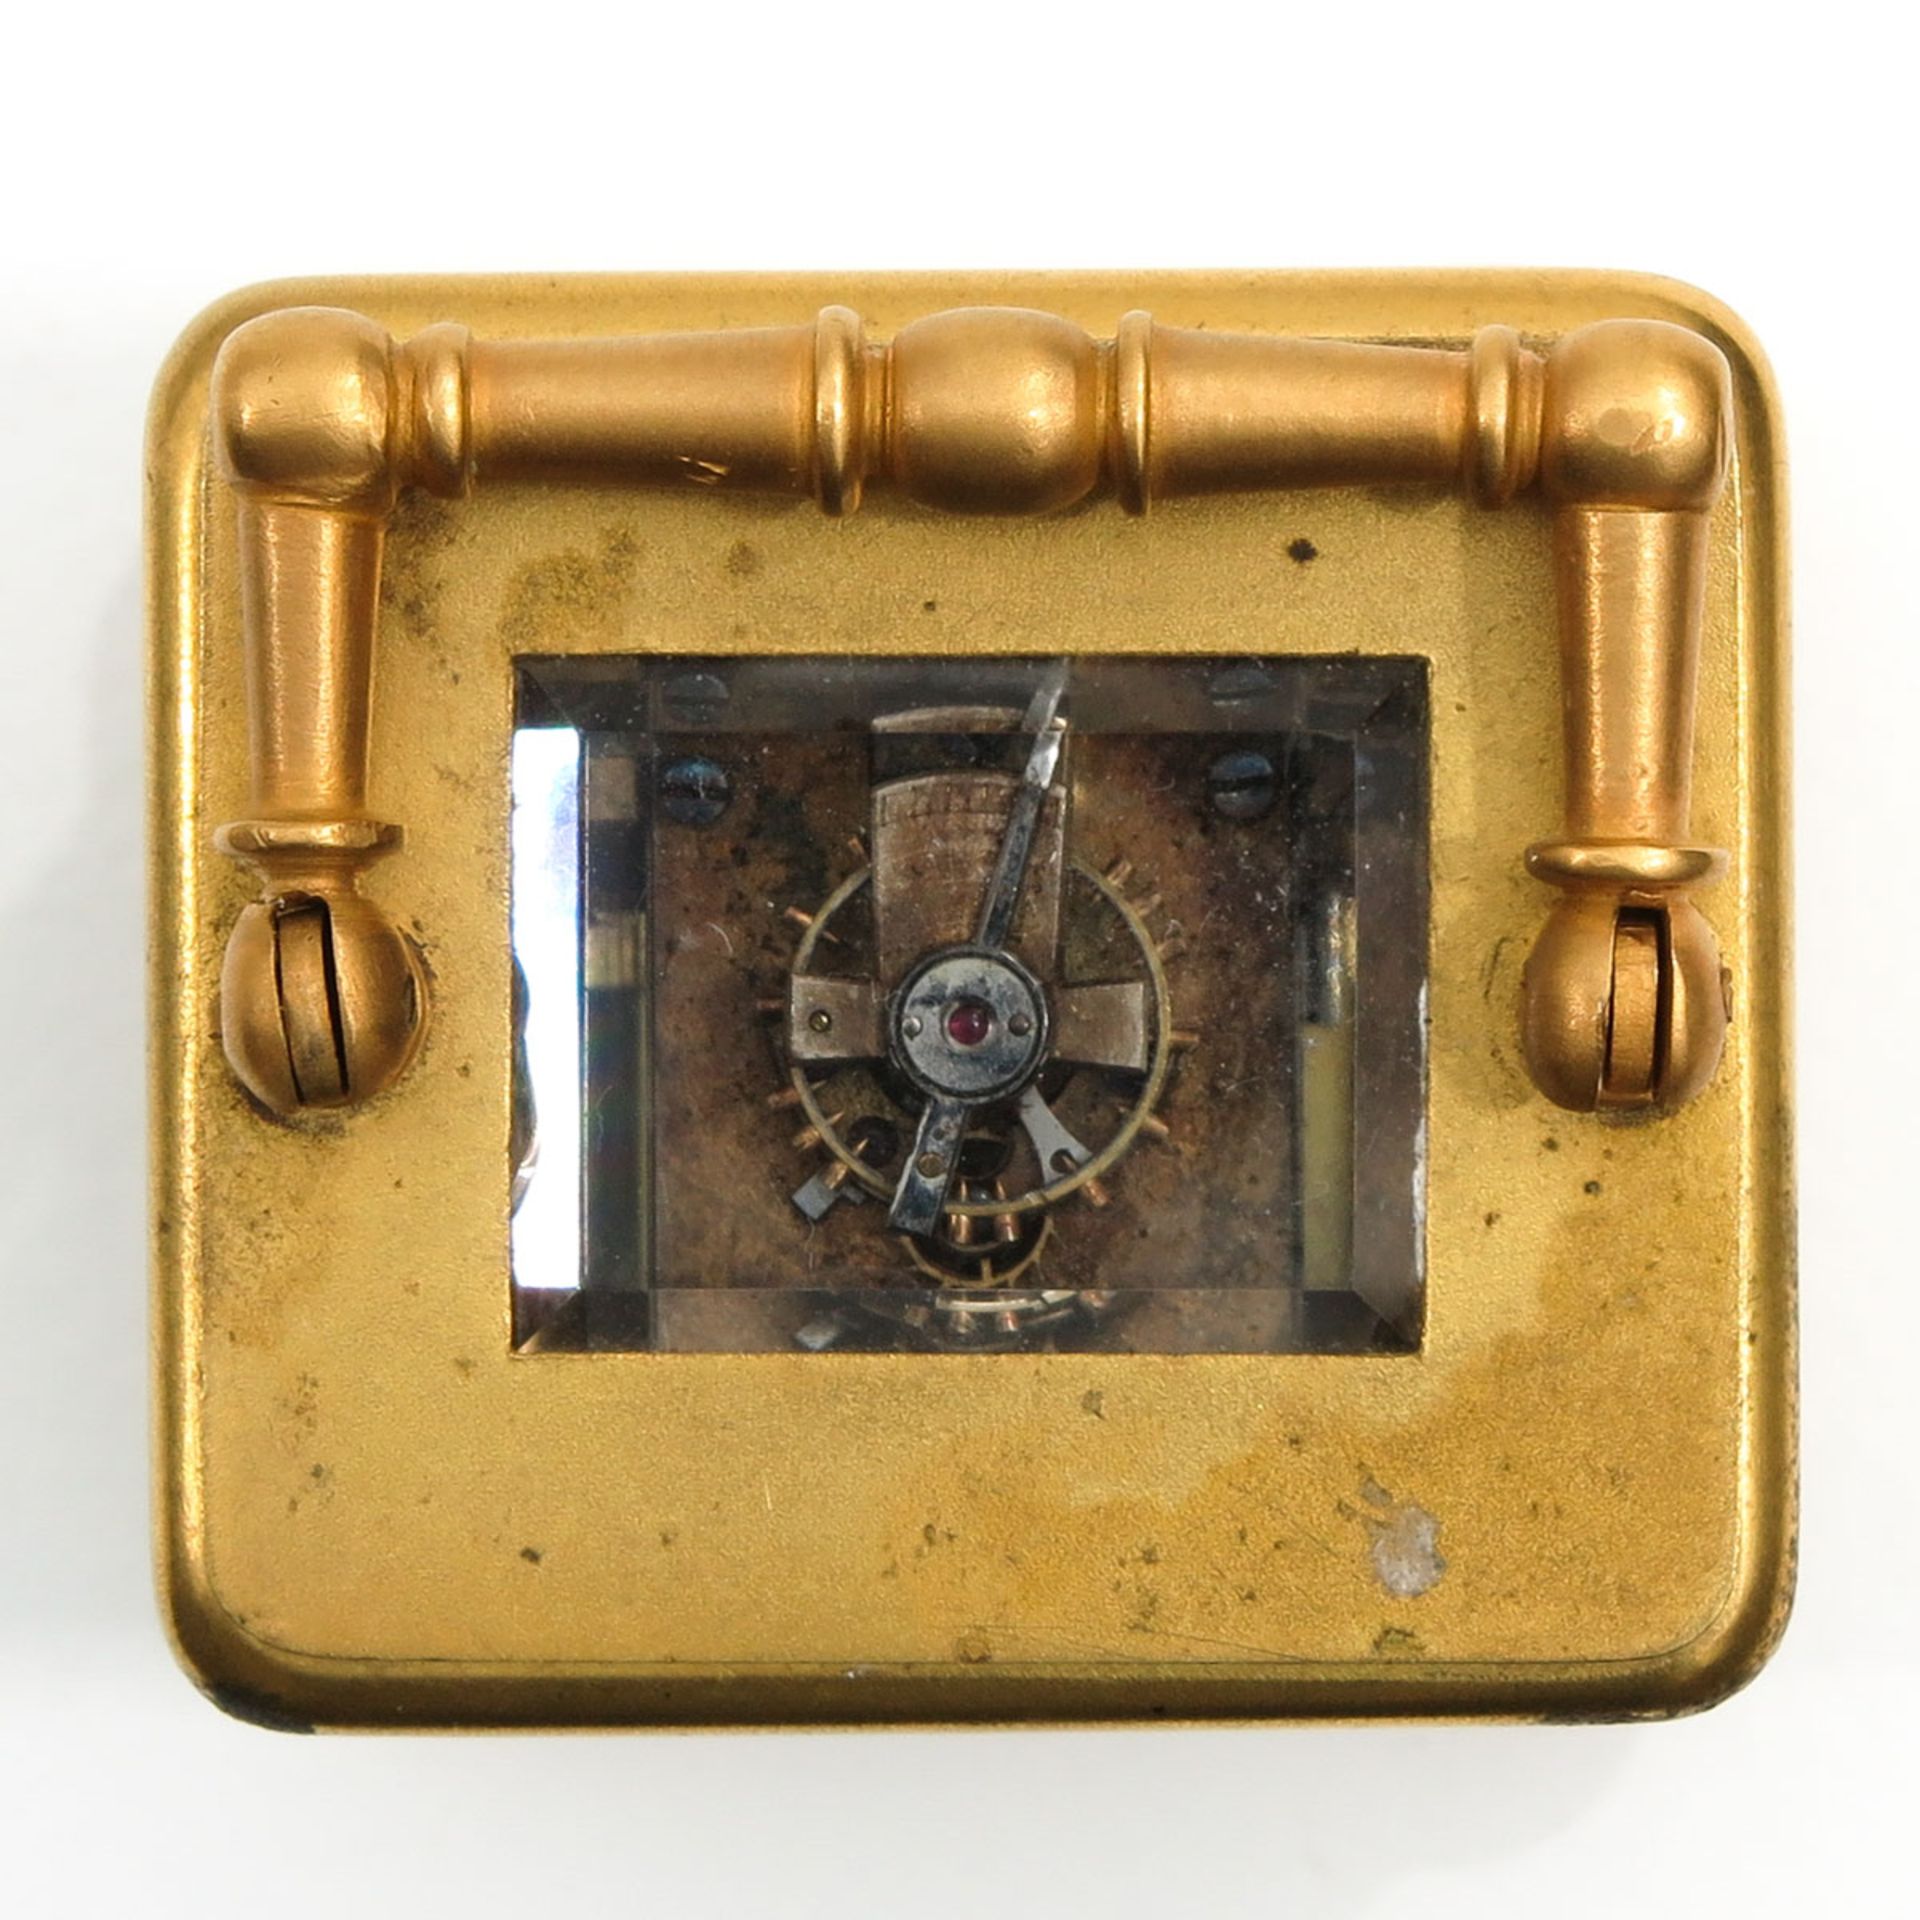 A Le Roy & Fils Carriage Clock - Image 5 of 8